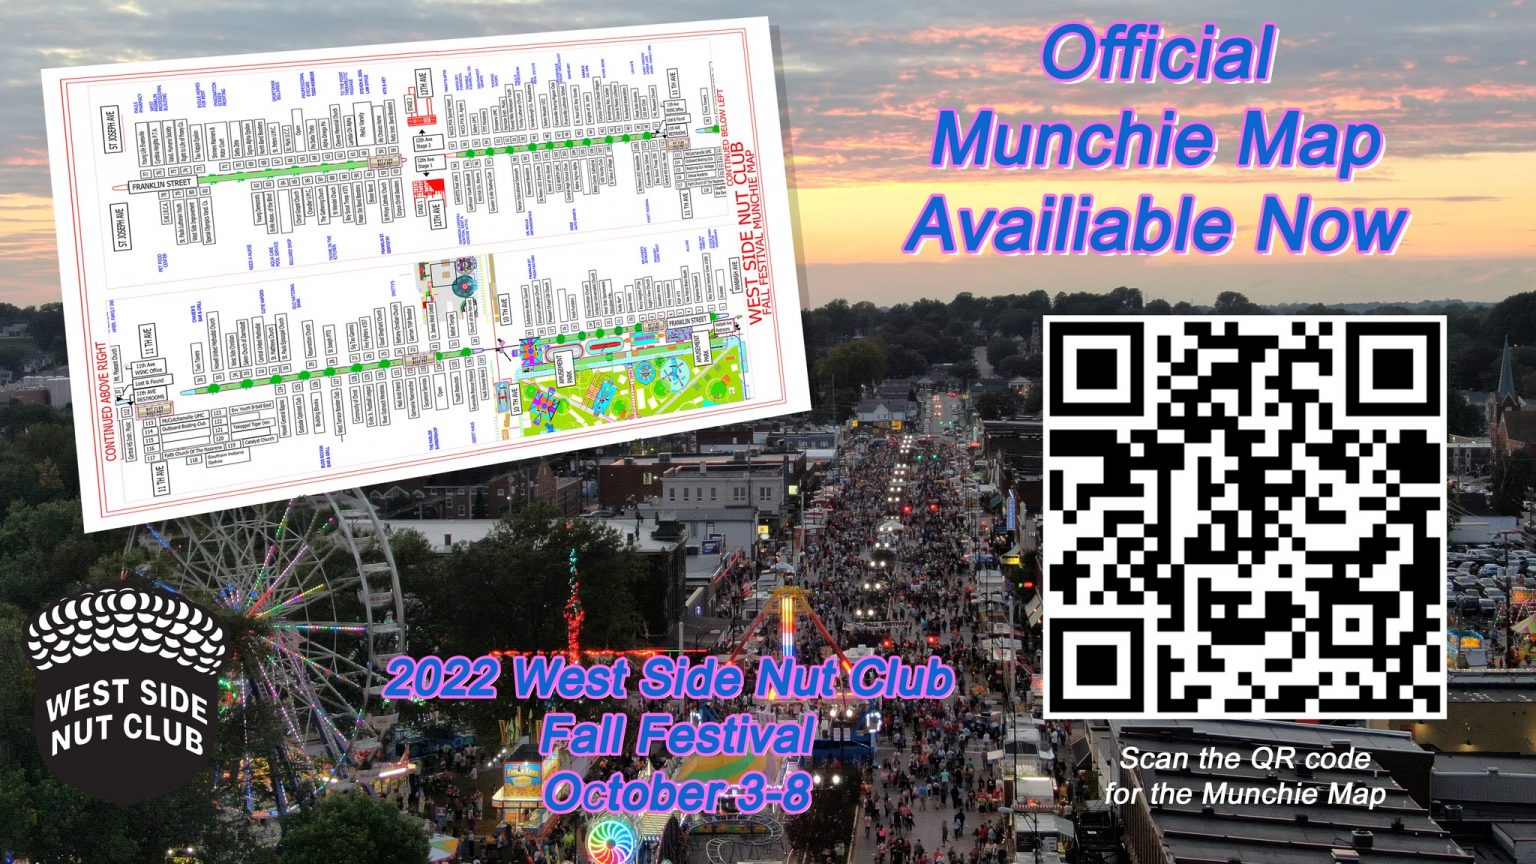 West Side Nut Club Fall Festival MUNCHIE MAP is out for 2022! WABX